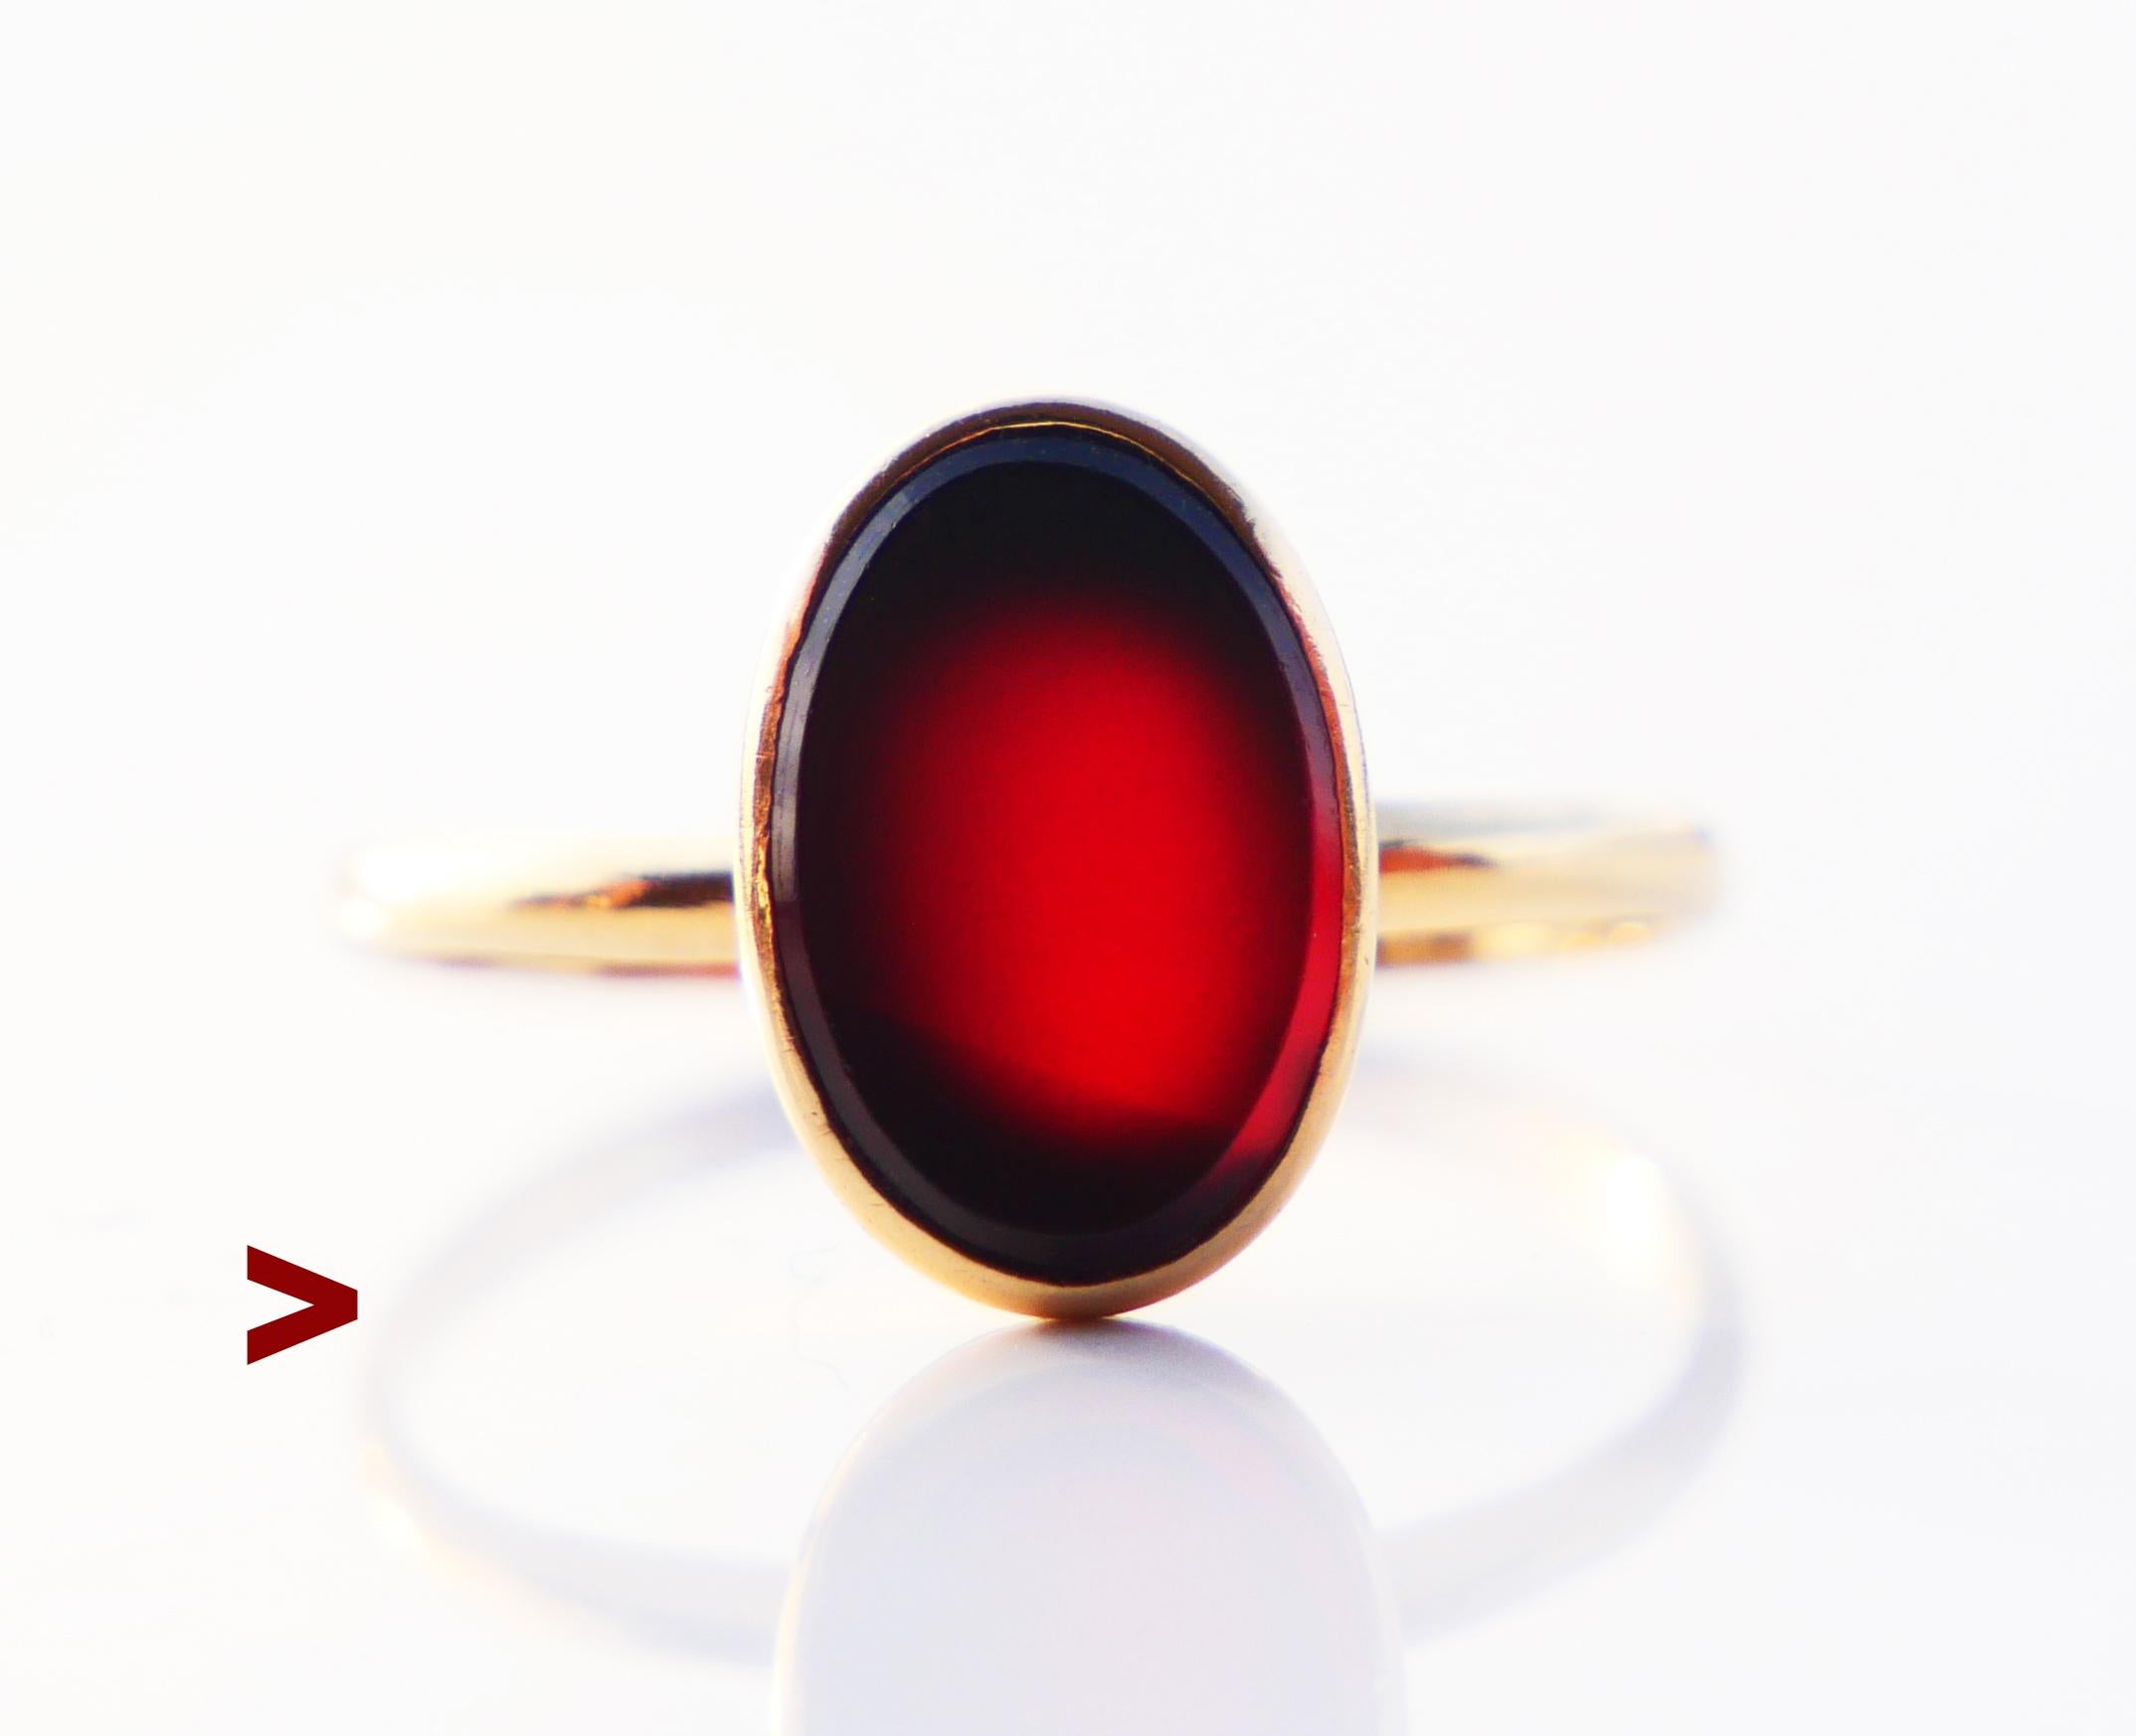 Signet Ring with plain band adorned with bezel set polished plate of natural Red Onyx stone 9 mm x 6 mm x 3 mm deep / ca 3 ct. Stone may change color a bit under from dark Red to almost Black under different light. Crown is 4 mm deep.

Stone's